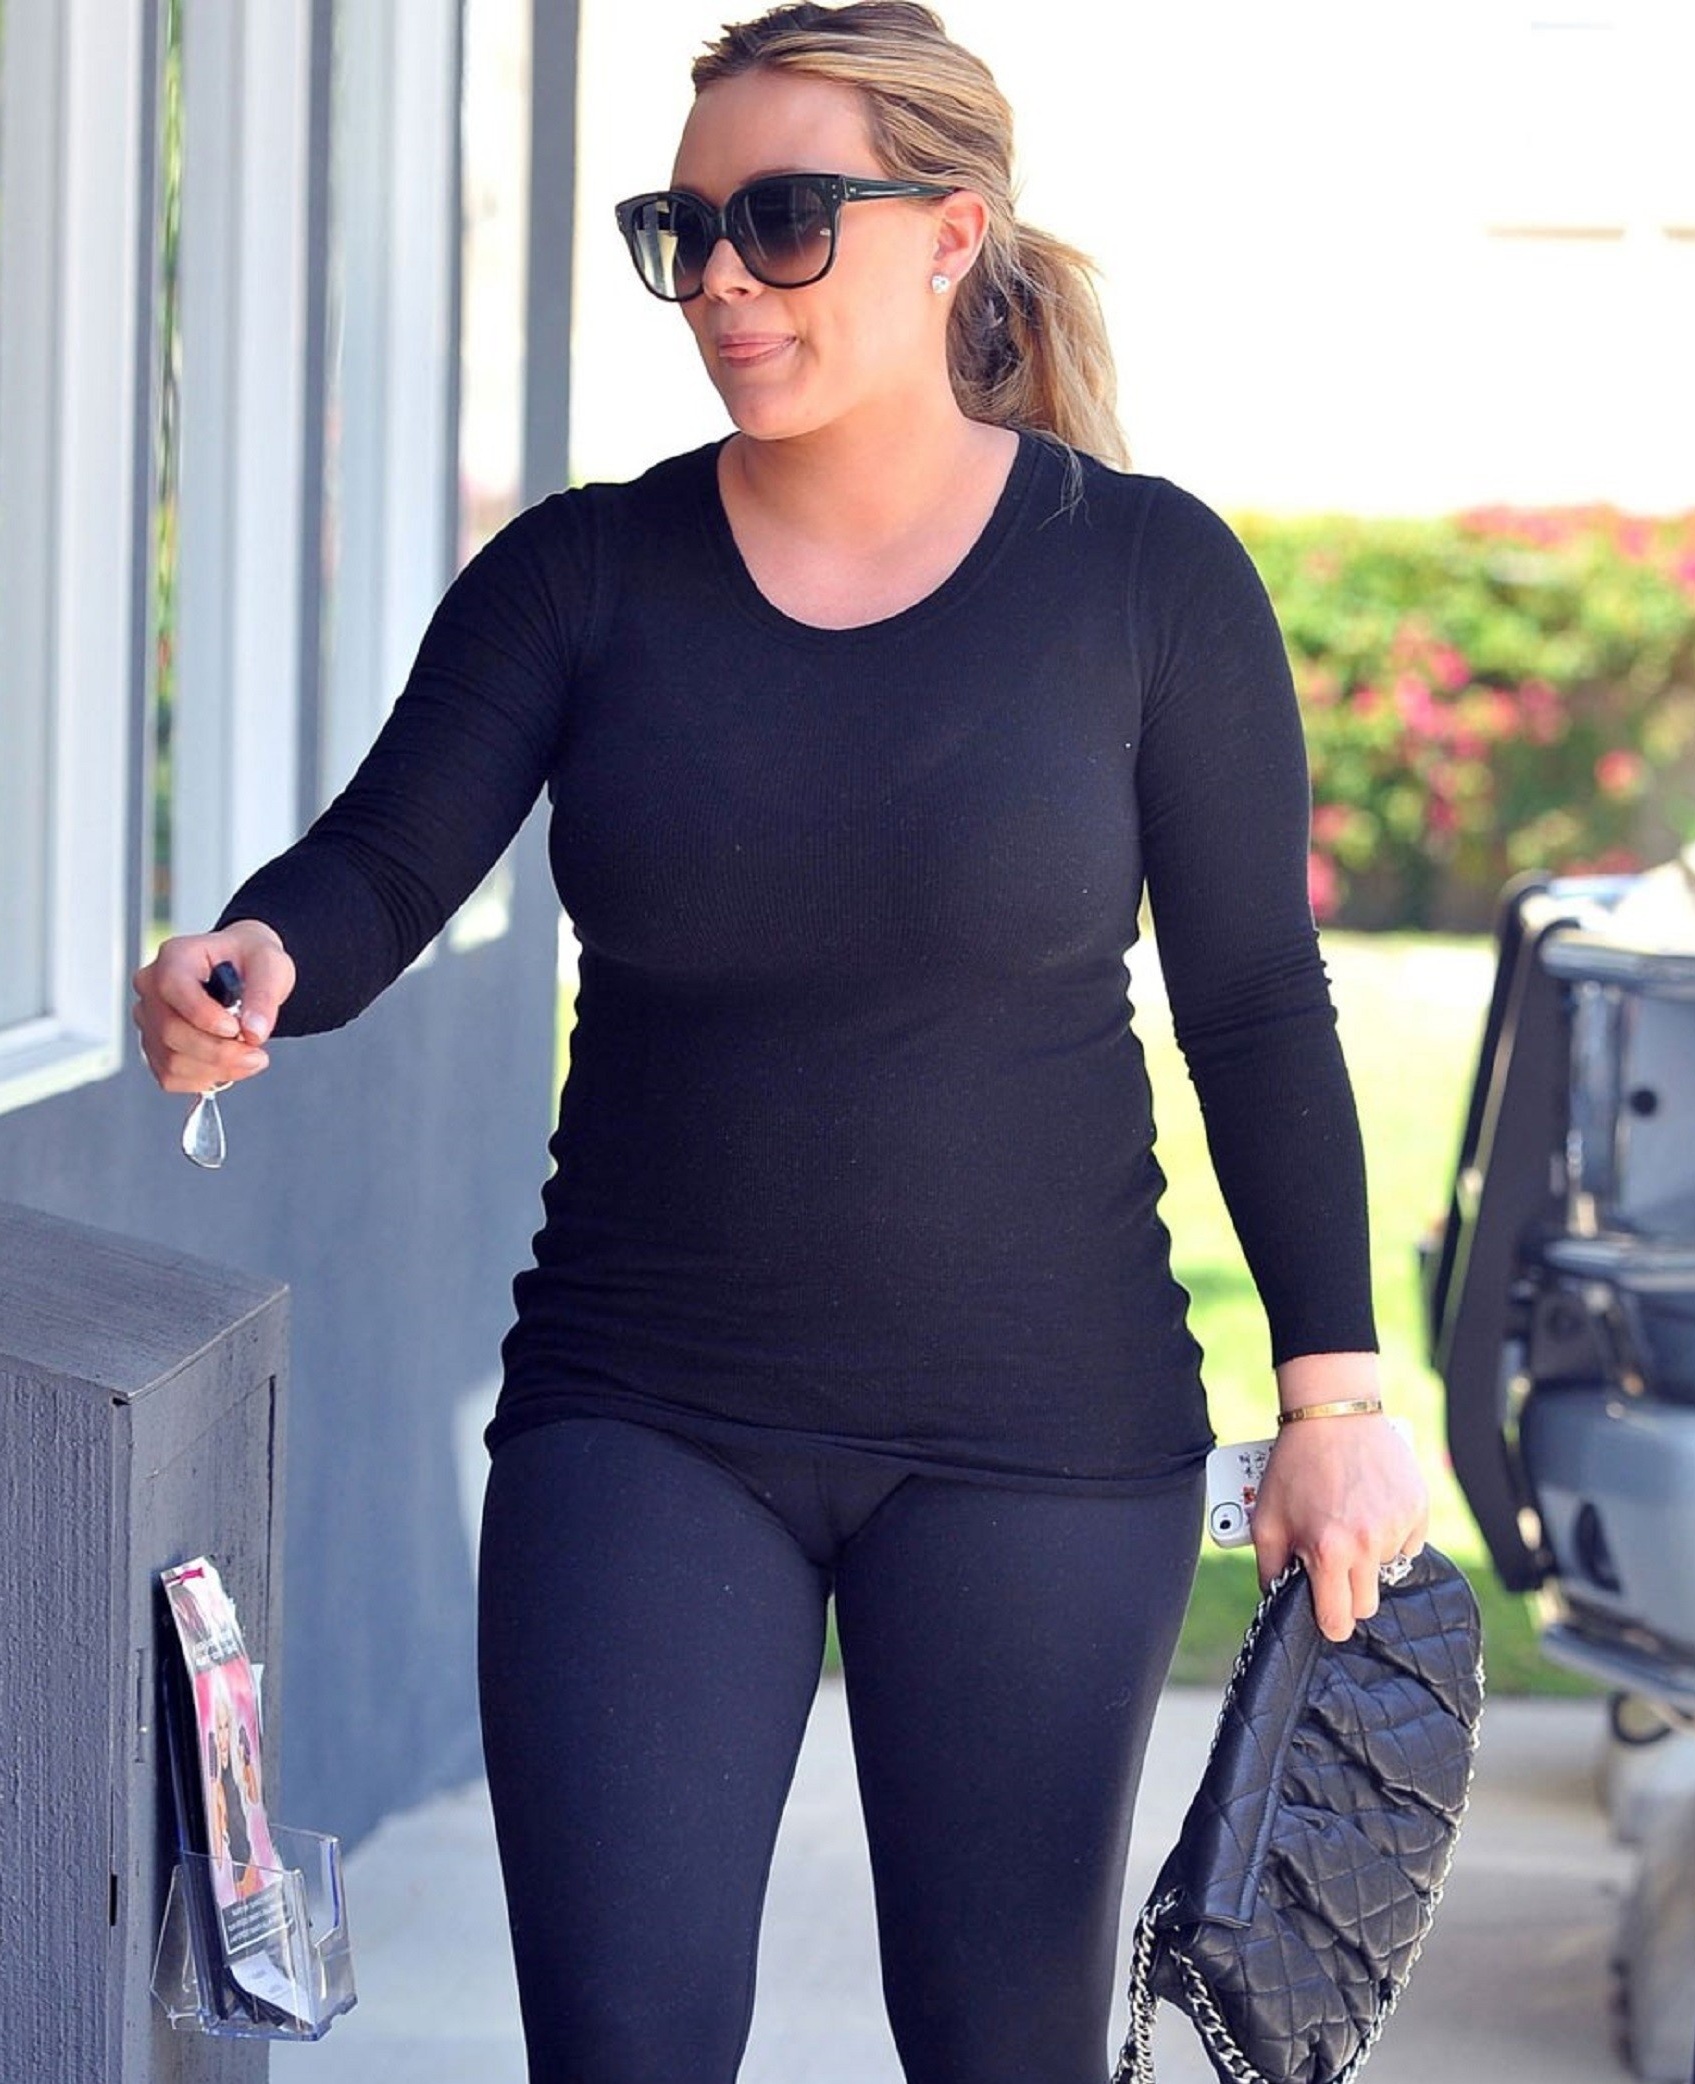 Hillary Duff wearing a tight black top and black yoga pants with visible camel toe.